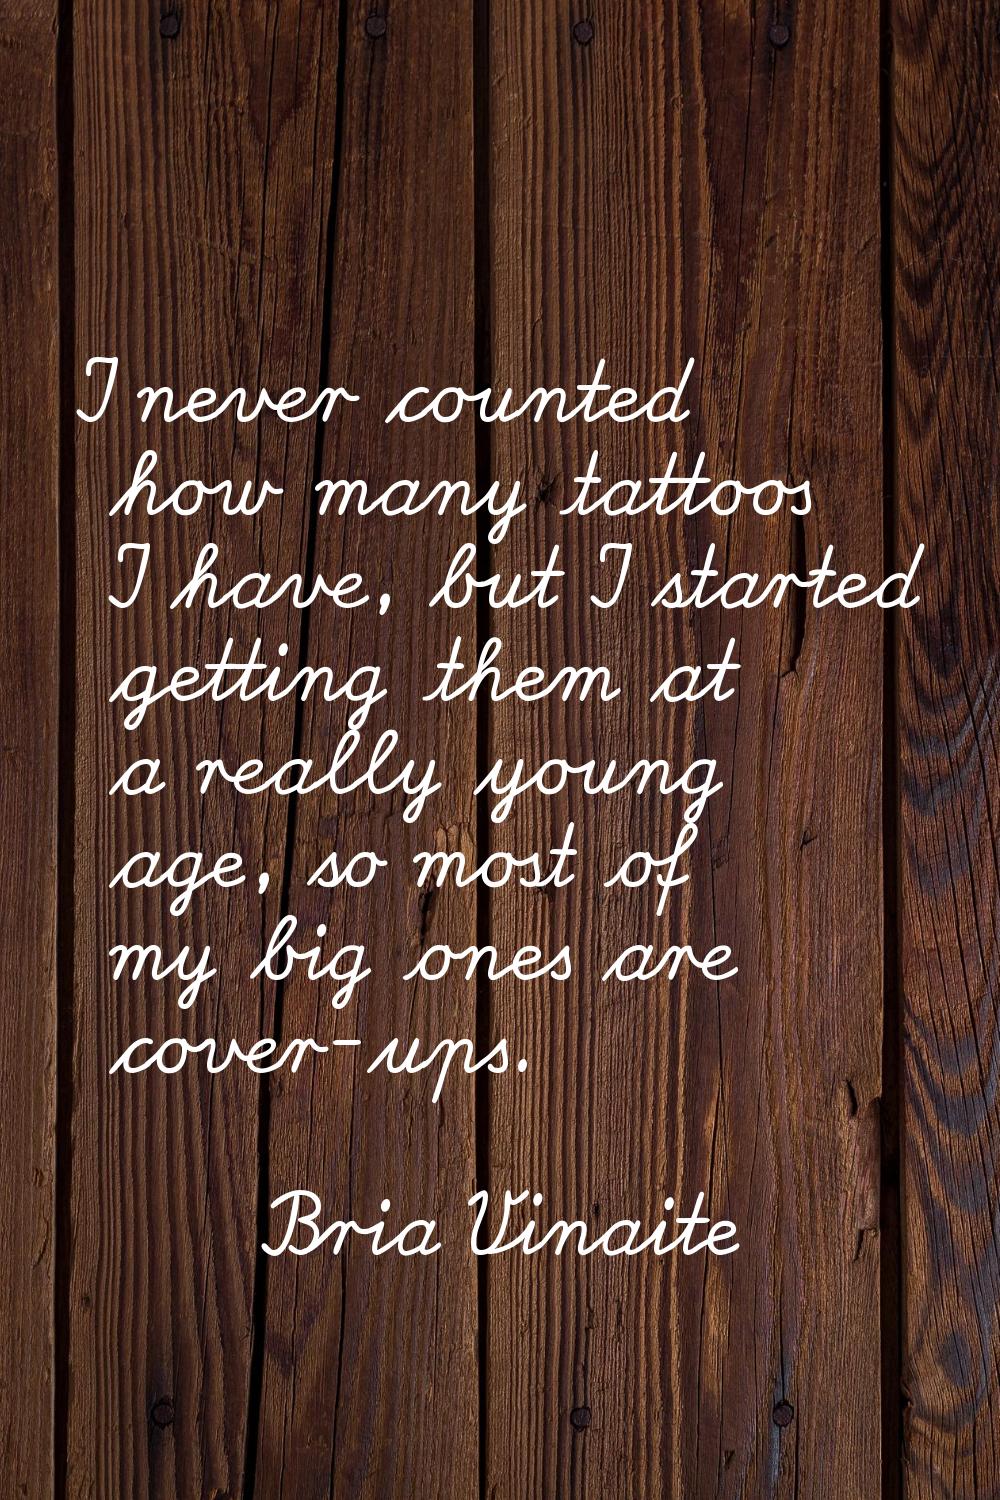 I never counted how many tattoos I have, but I started getting them at a really young age, so most 